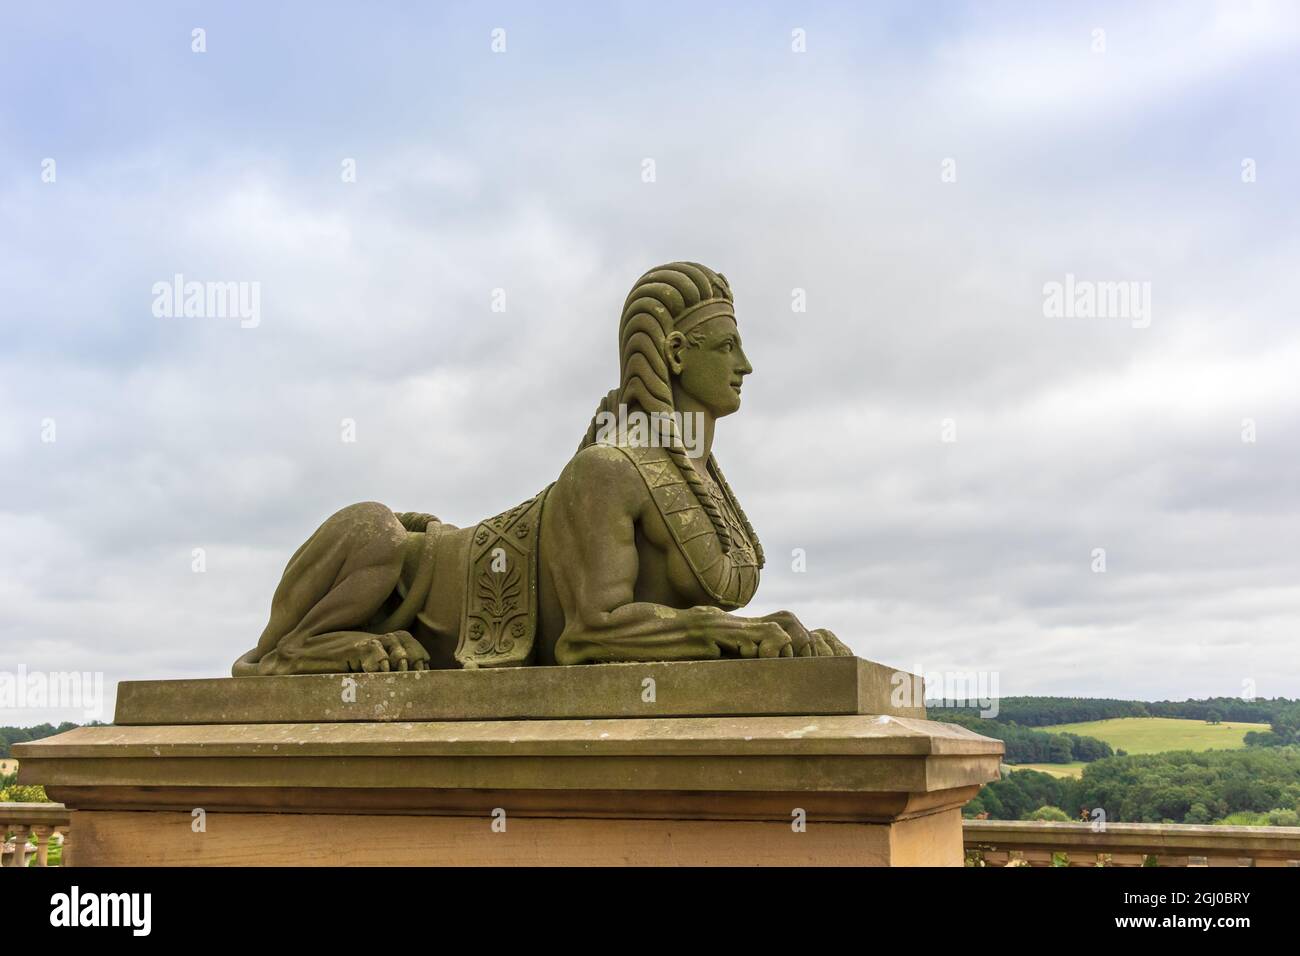 Antique stone carved sculpture of a sphinx, famous monument depicts the body of a lion with a human head in the gardens of Harewood House near Leeds. Stock Photo